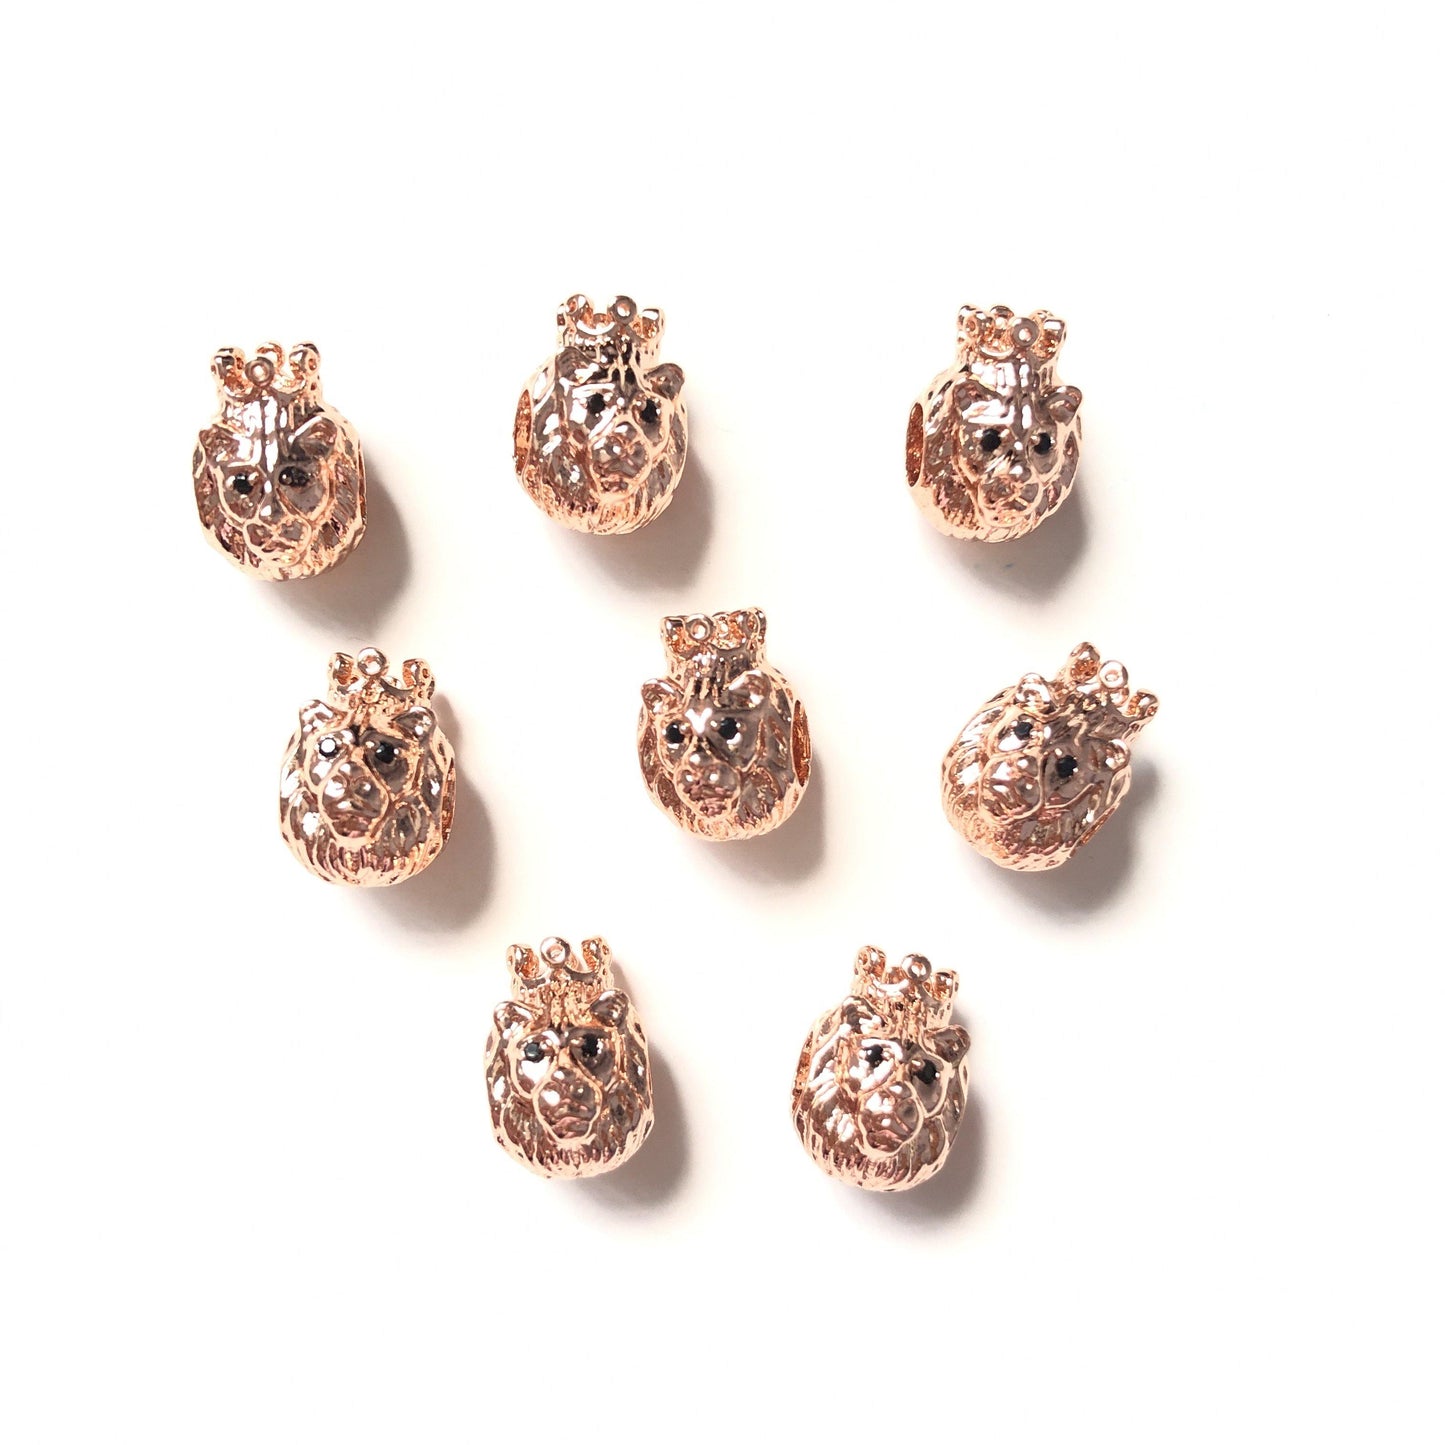 10-20pcs Gold Plated Copper Crown Lion King Spacers Rose Gold CZ Paved Spacers Animal Spacers Charms Beads Beyond